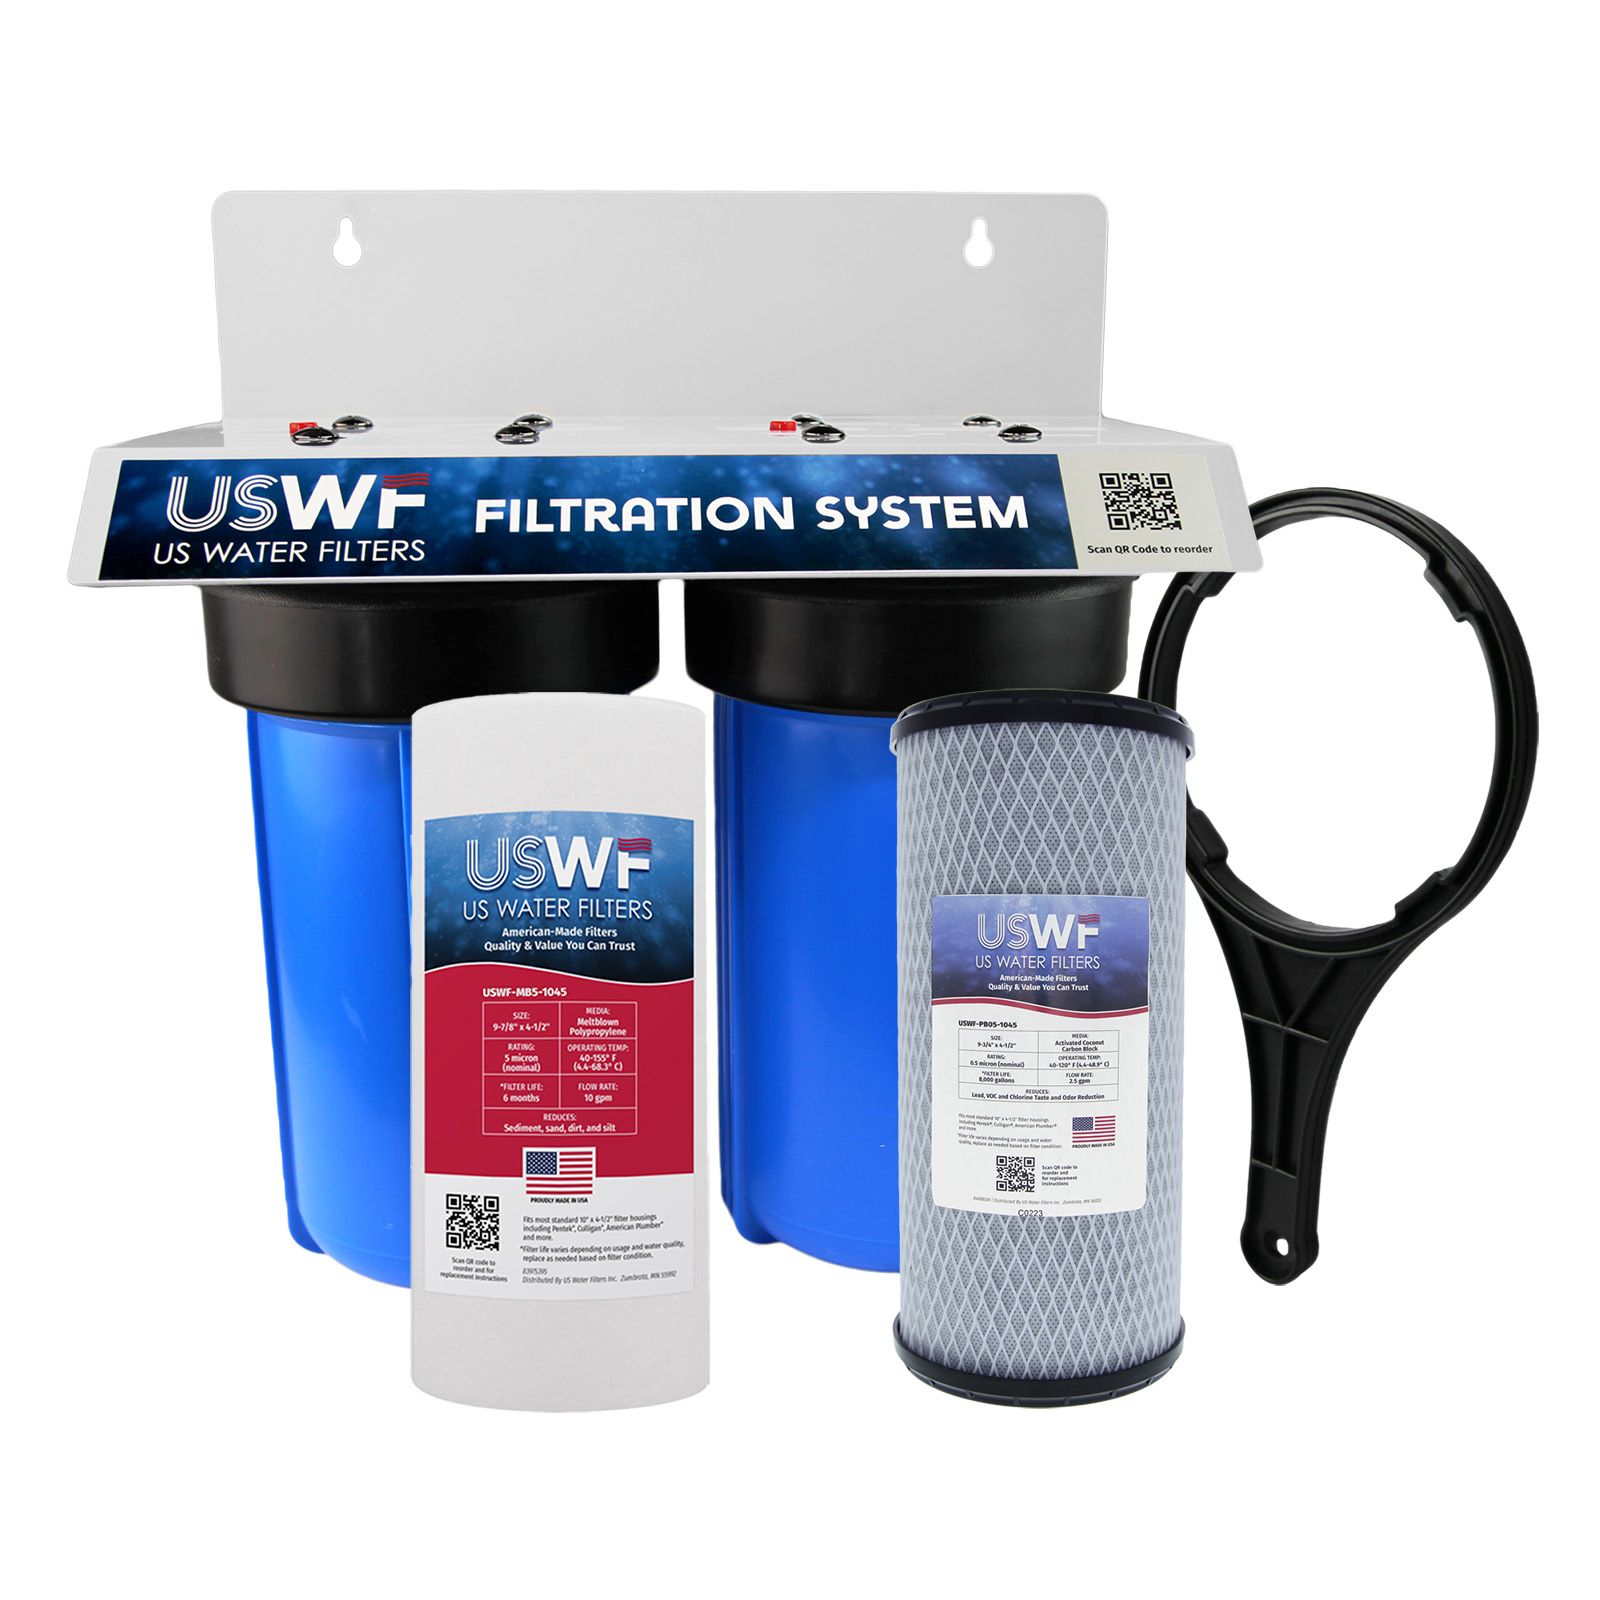 USWF Lead Dual 10" 2-Stage Filtration System, Sediment & 10" 0.5 Micron Lead Carbon Block Filters, 1" Inlet/Outlet